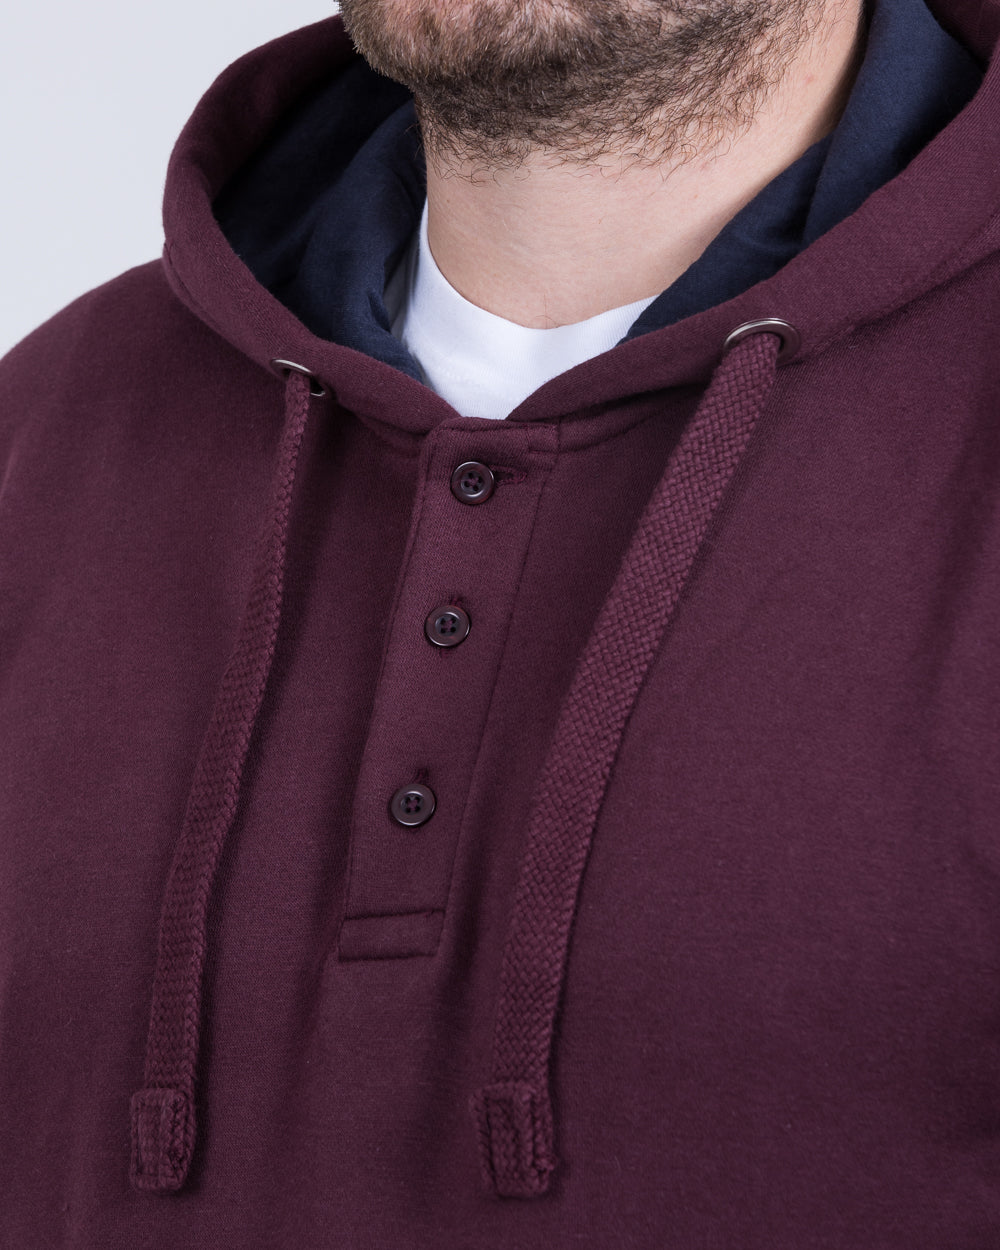 2t Pullover Tall Quarter Button Hoodie (burgundy)